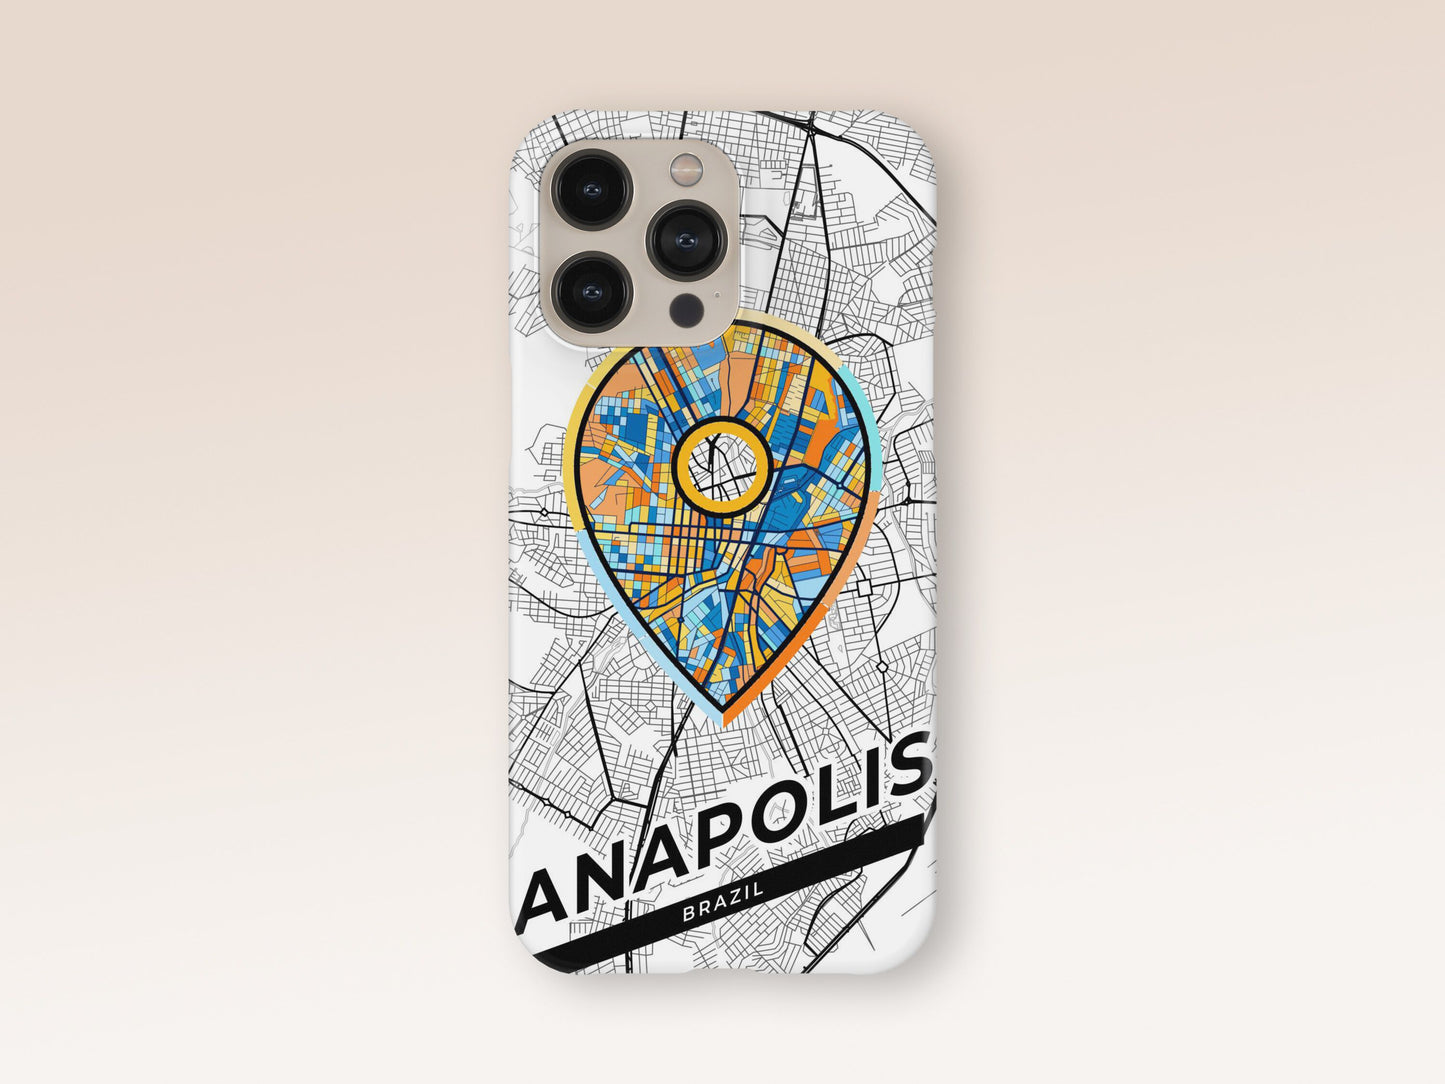 Anapolis Brazil slim phone case with colorful icon. Birthday, wedding or housewarming gift. Couple match cases. 1